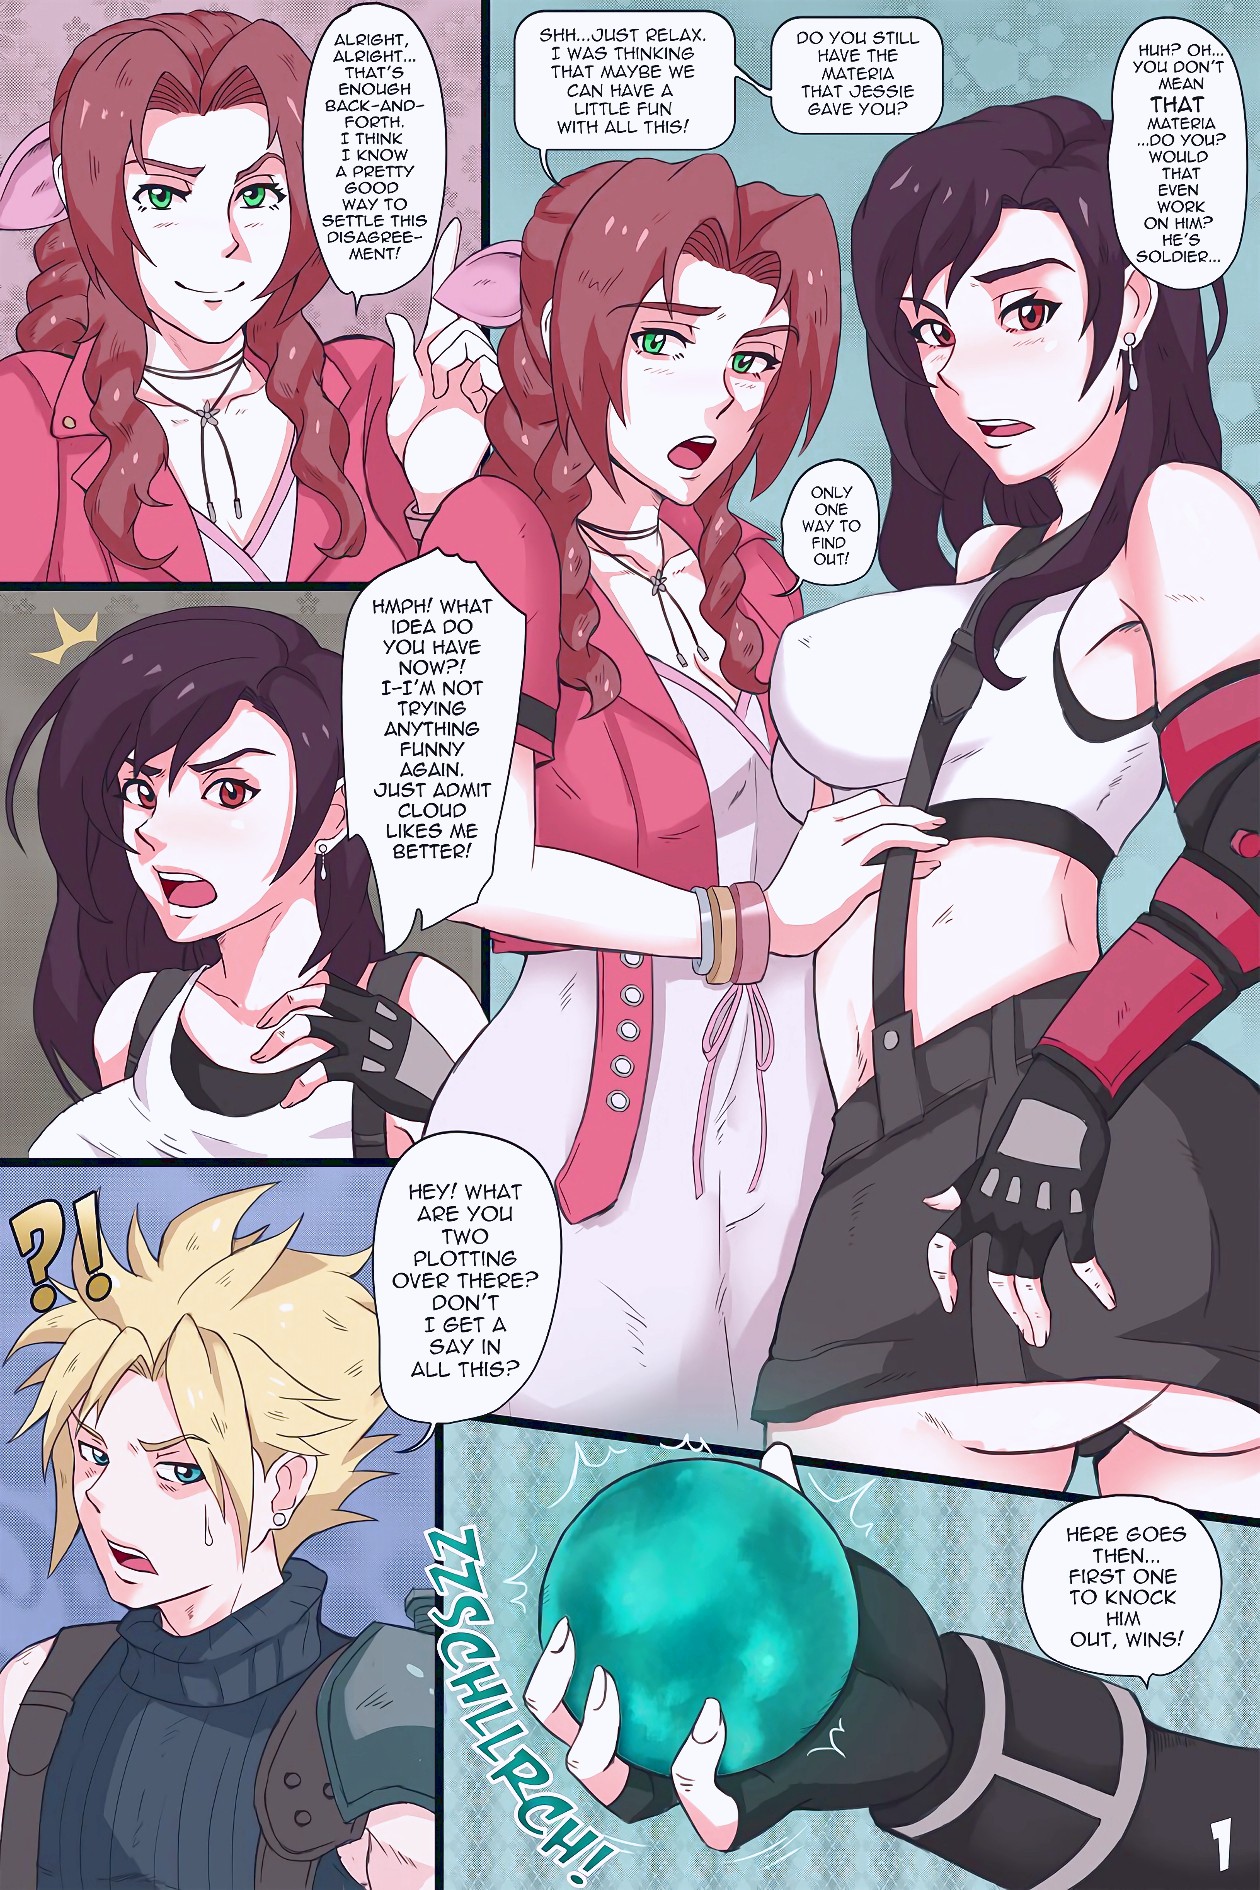 FFVII porn comic page 01 on category Final Fantasy